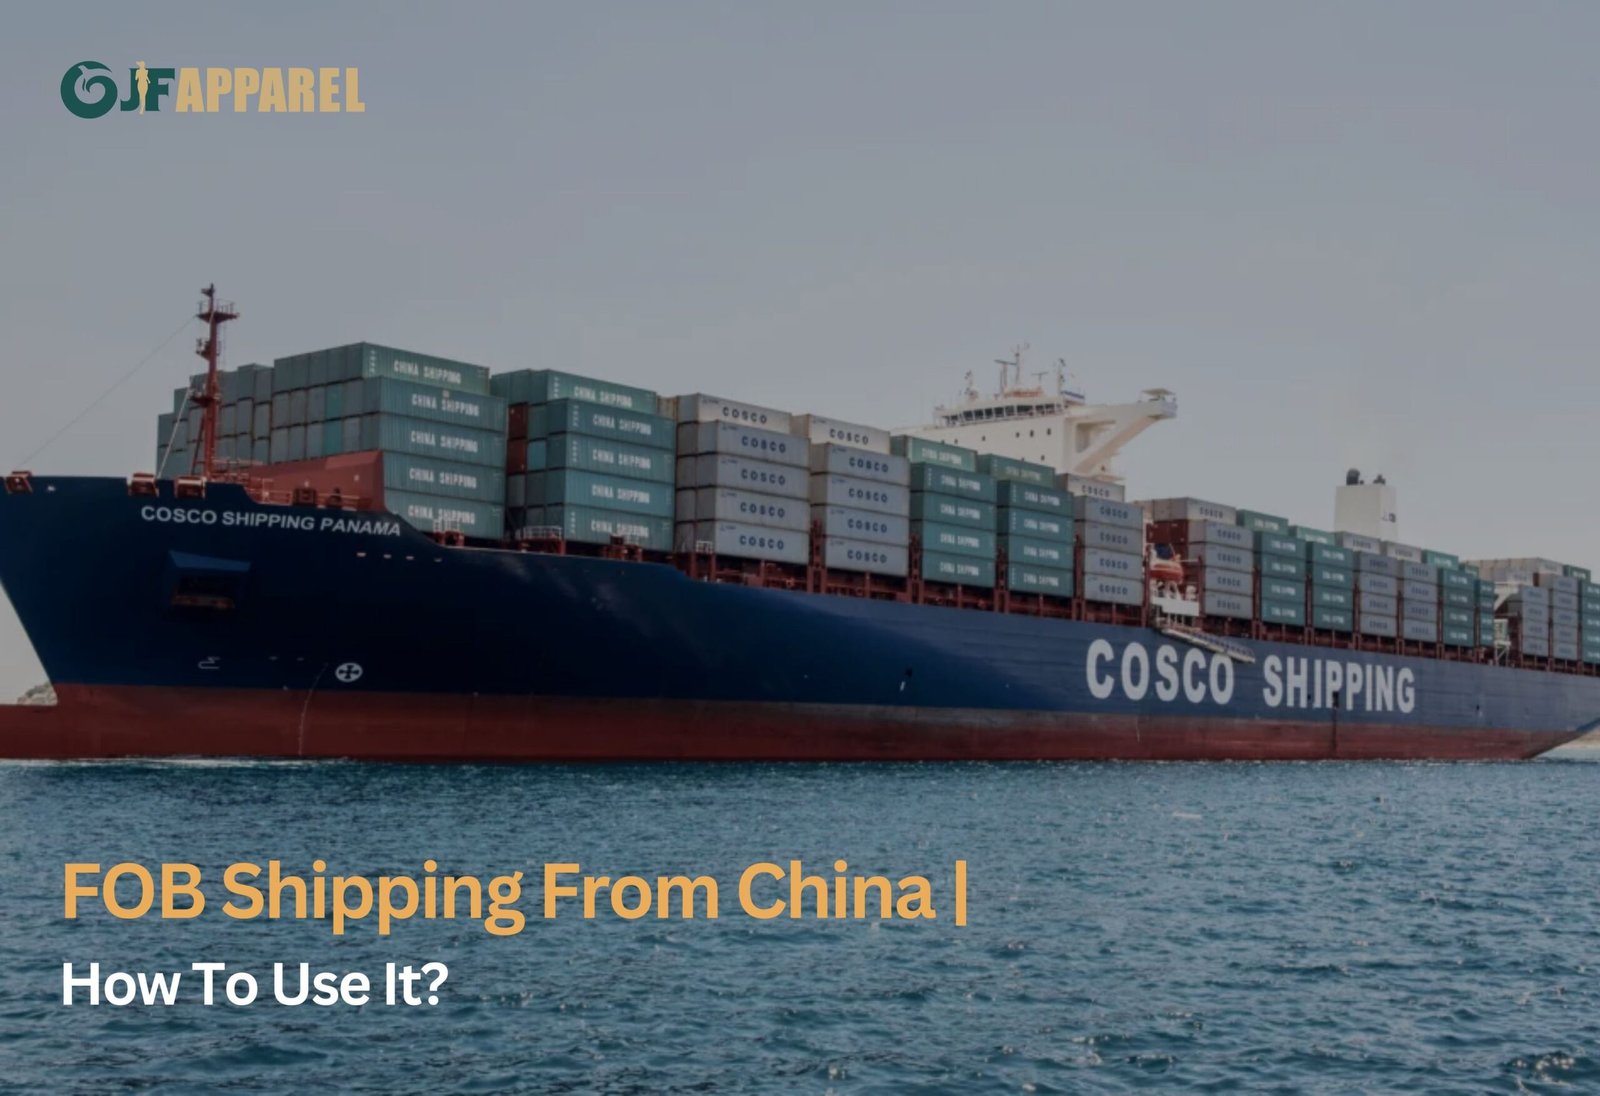 FOB Shipping From China | Essential Guide on How To Use It